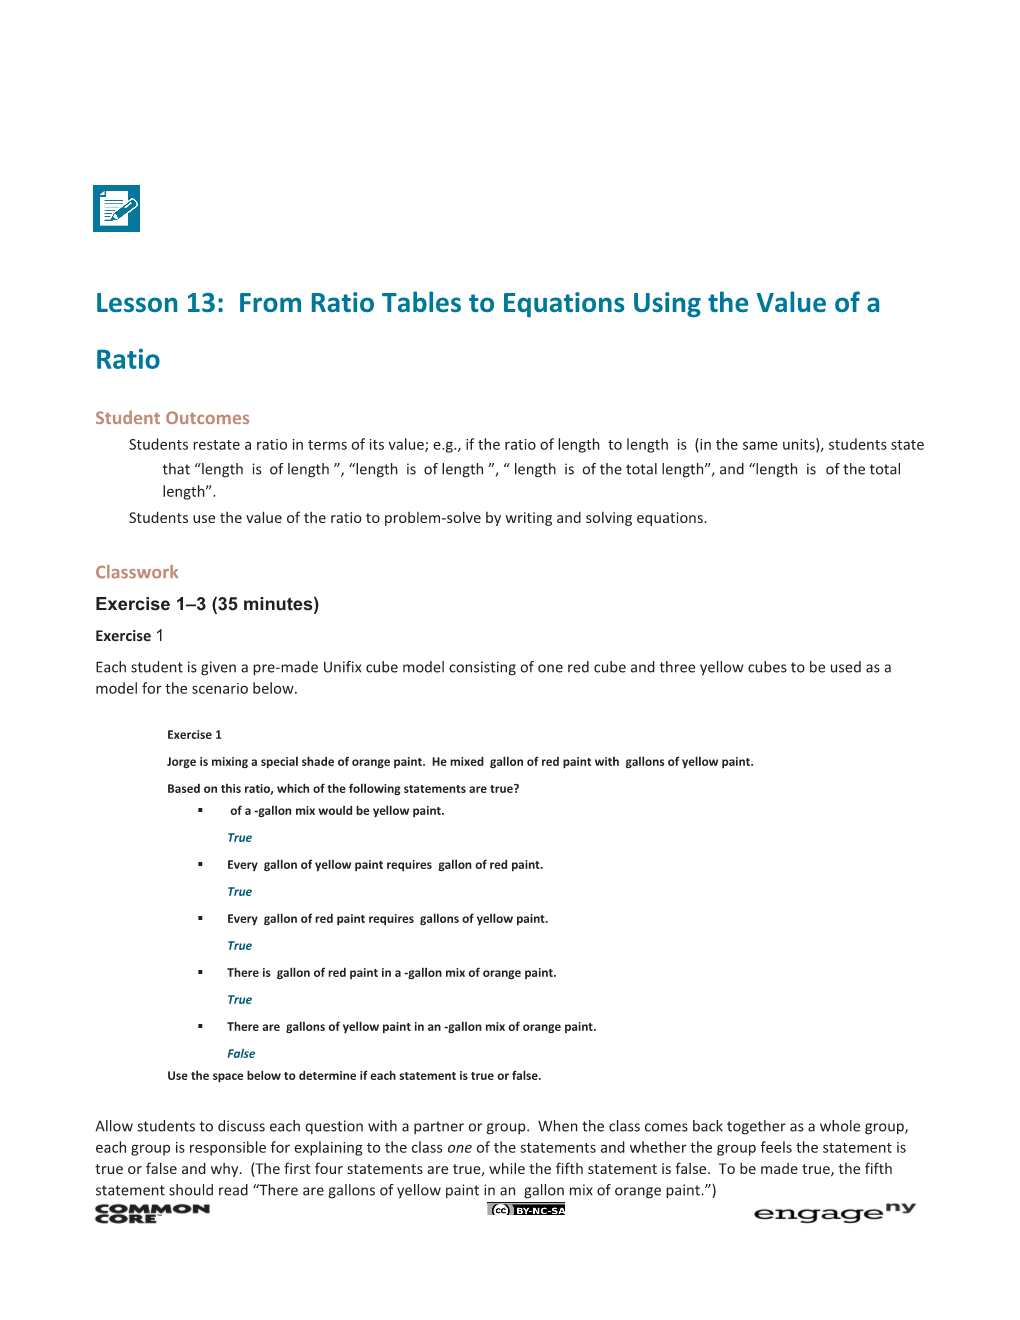 Lesson 13: from Ratio Tables to Equations Using the Value of a Ratio